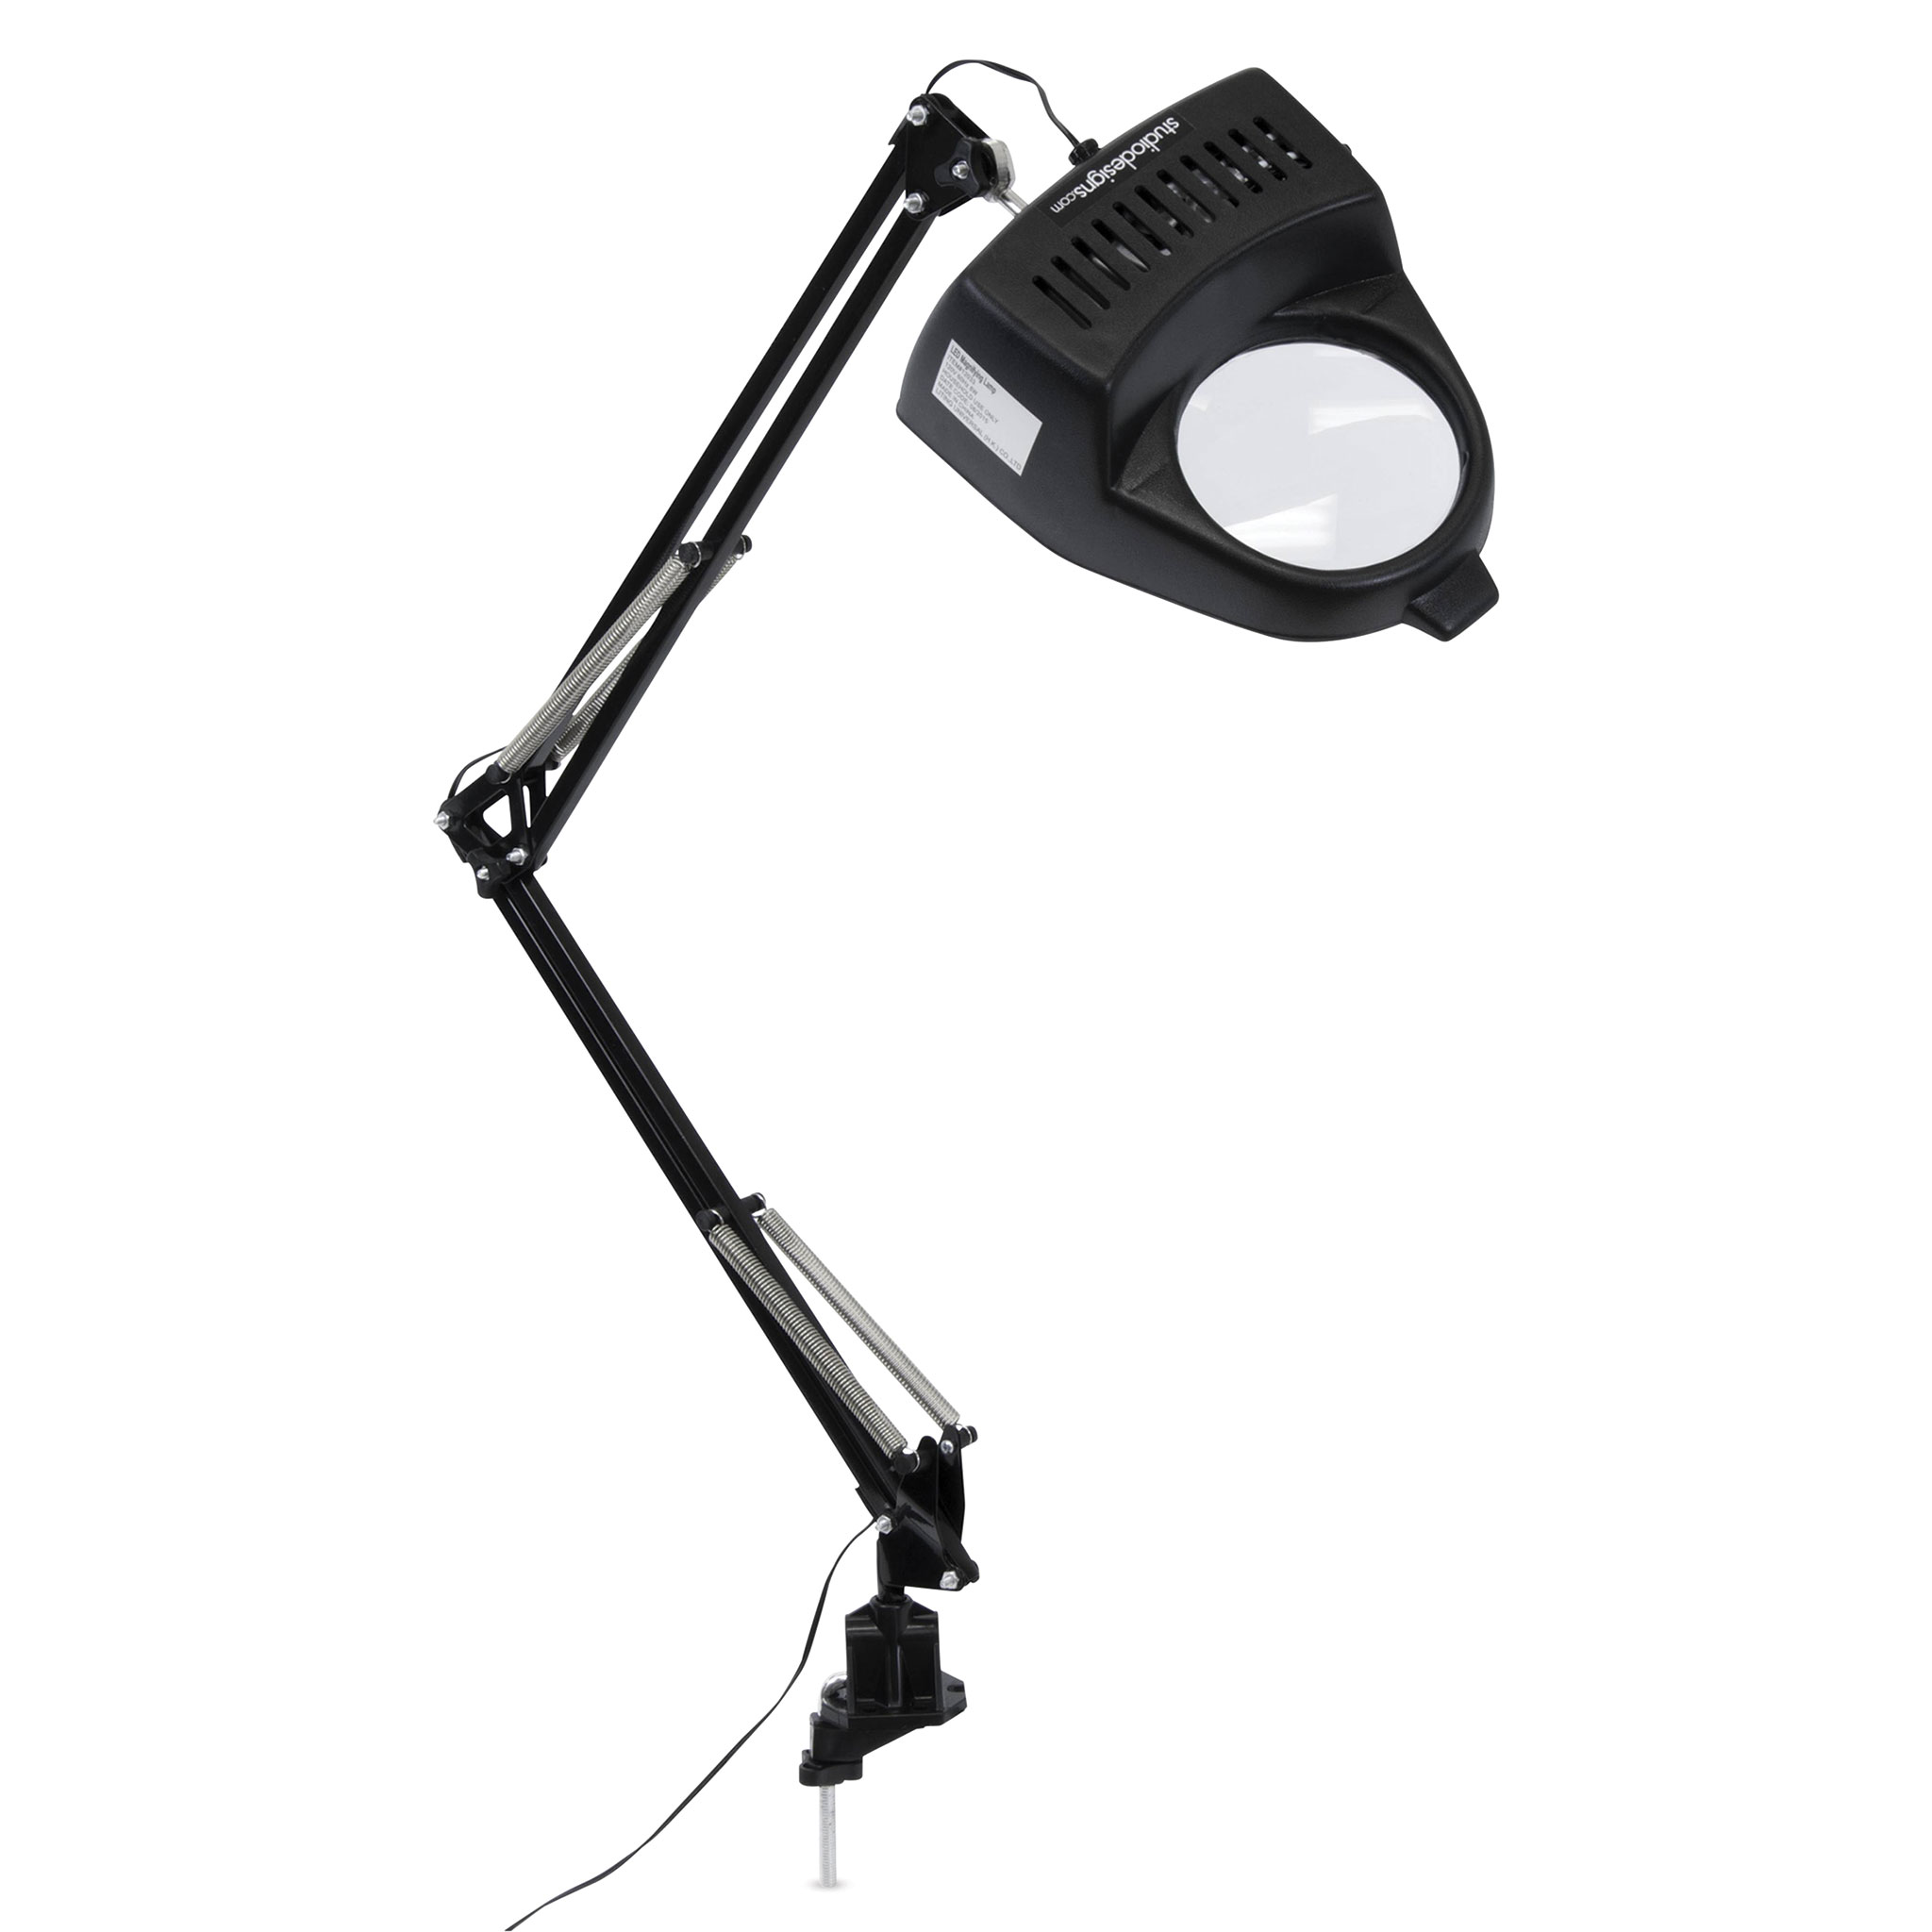 3 Diopter (1.75X Magnification) LED Magnifying Lamp with Clamp, 5 inch Lens + Flip Cover